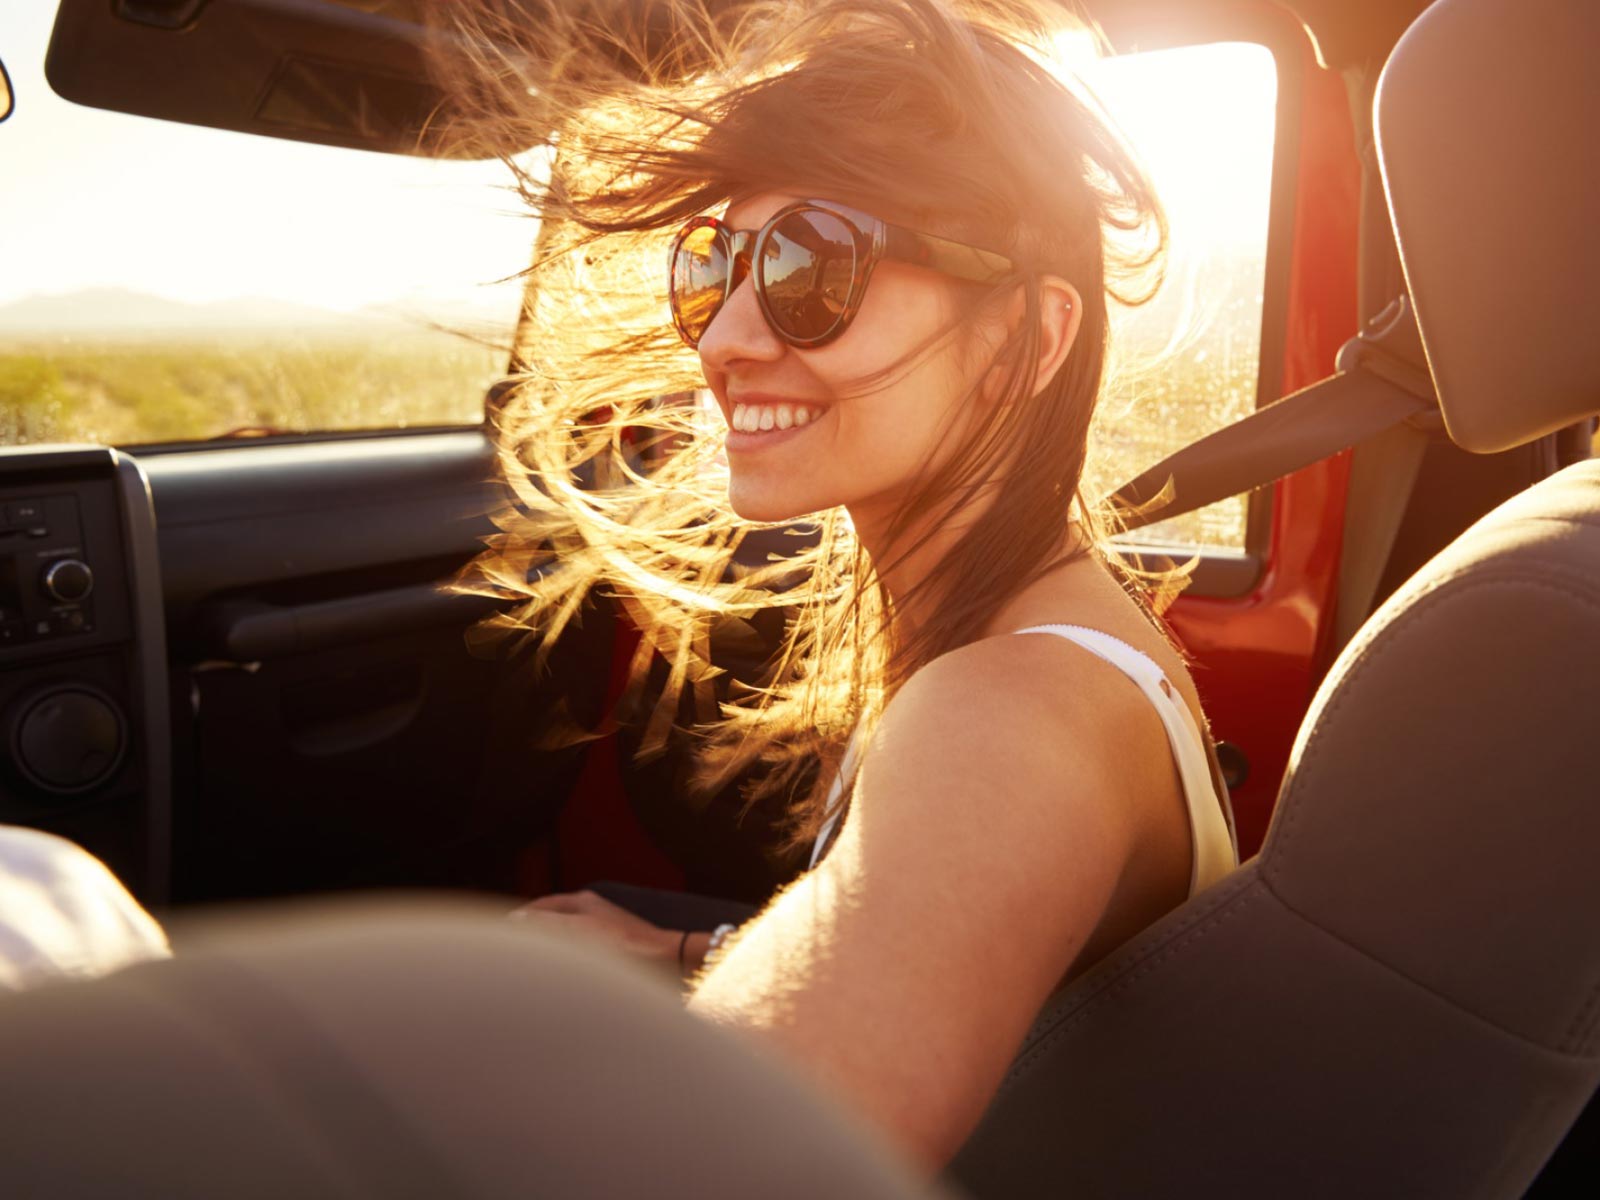 Young lady enjoying herself, wearing sunglasses, with the wind in her hair, while she's riding as a passenger in a convertible all-terrain vehicle, with the sun setting behind her.